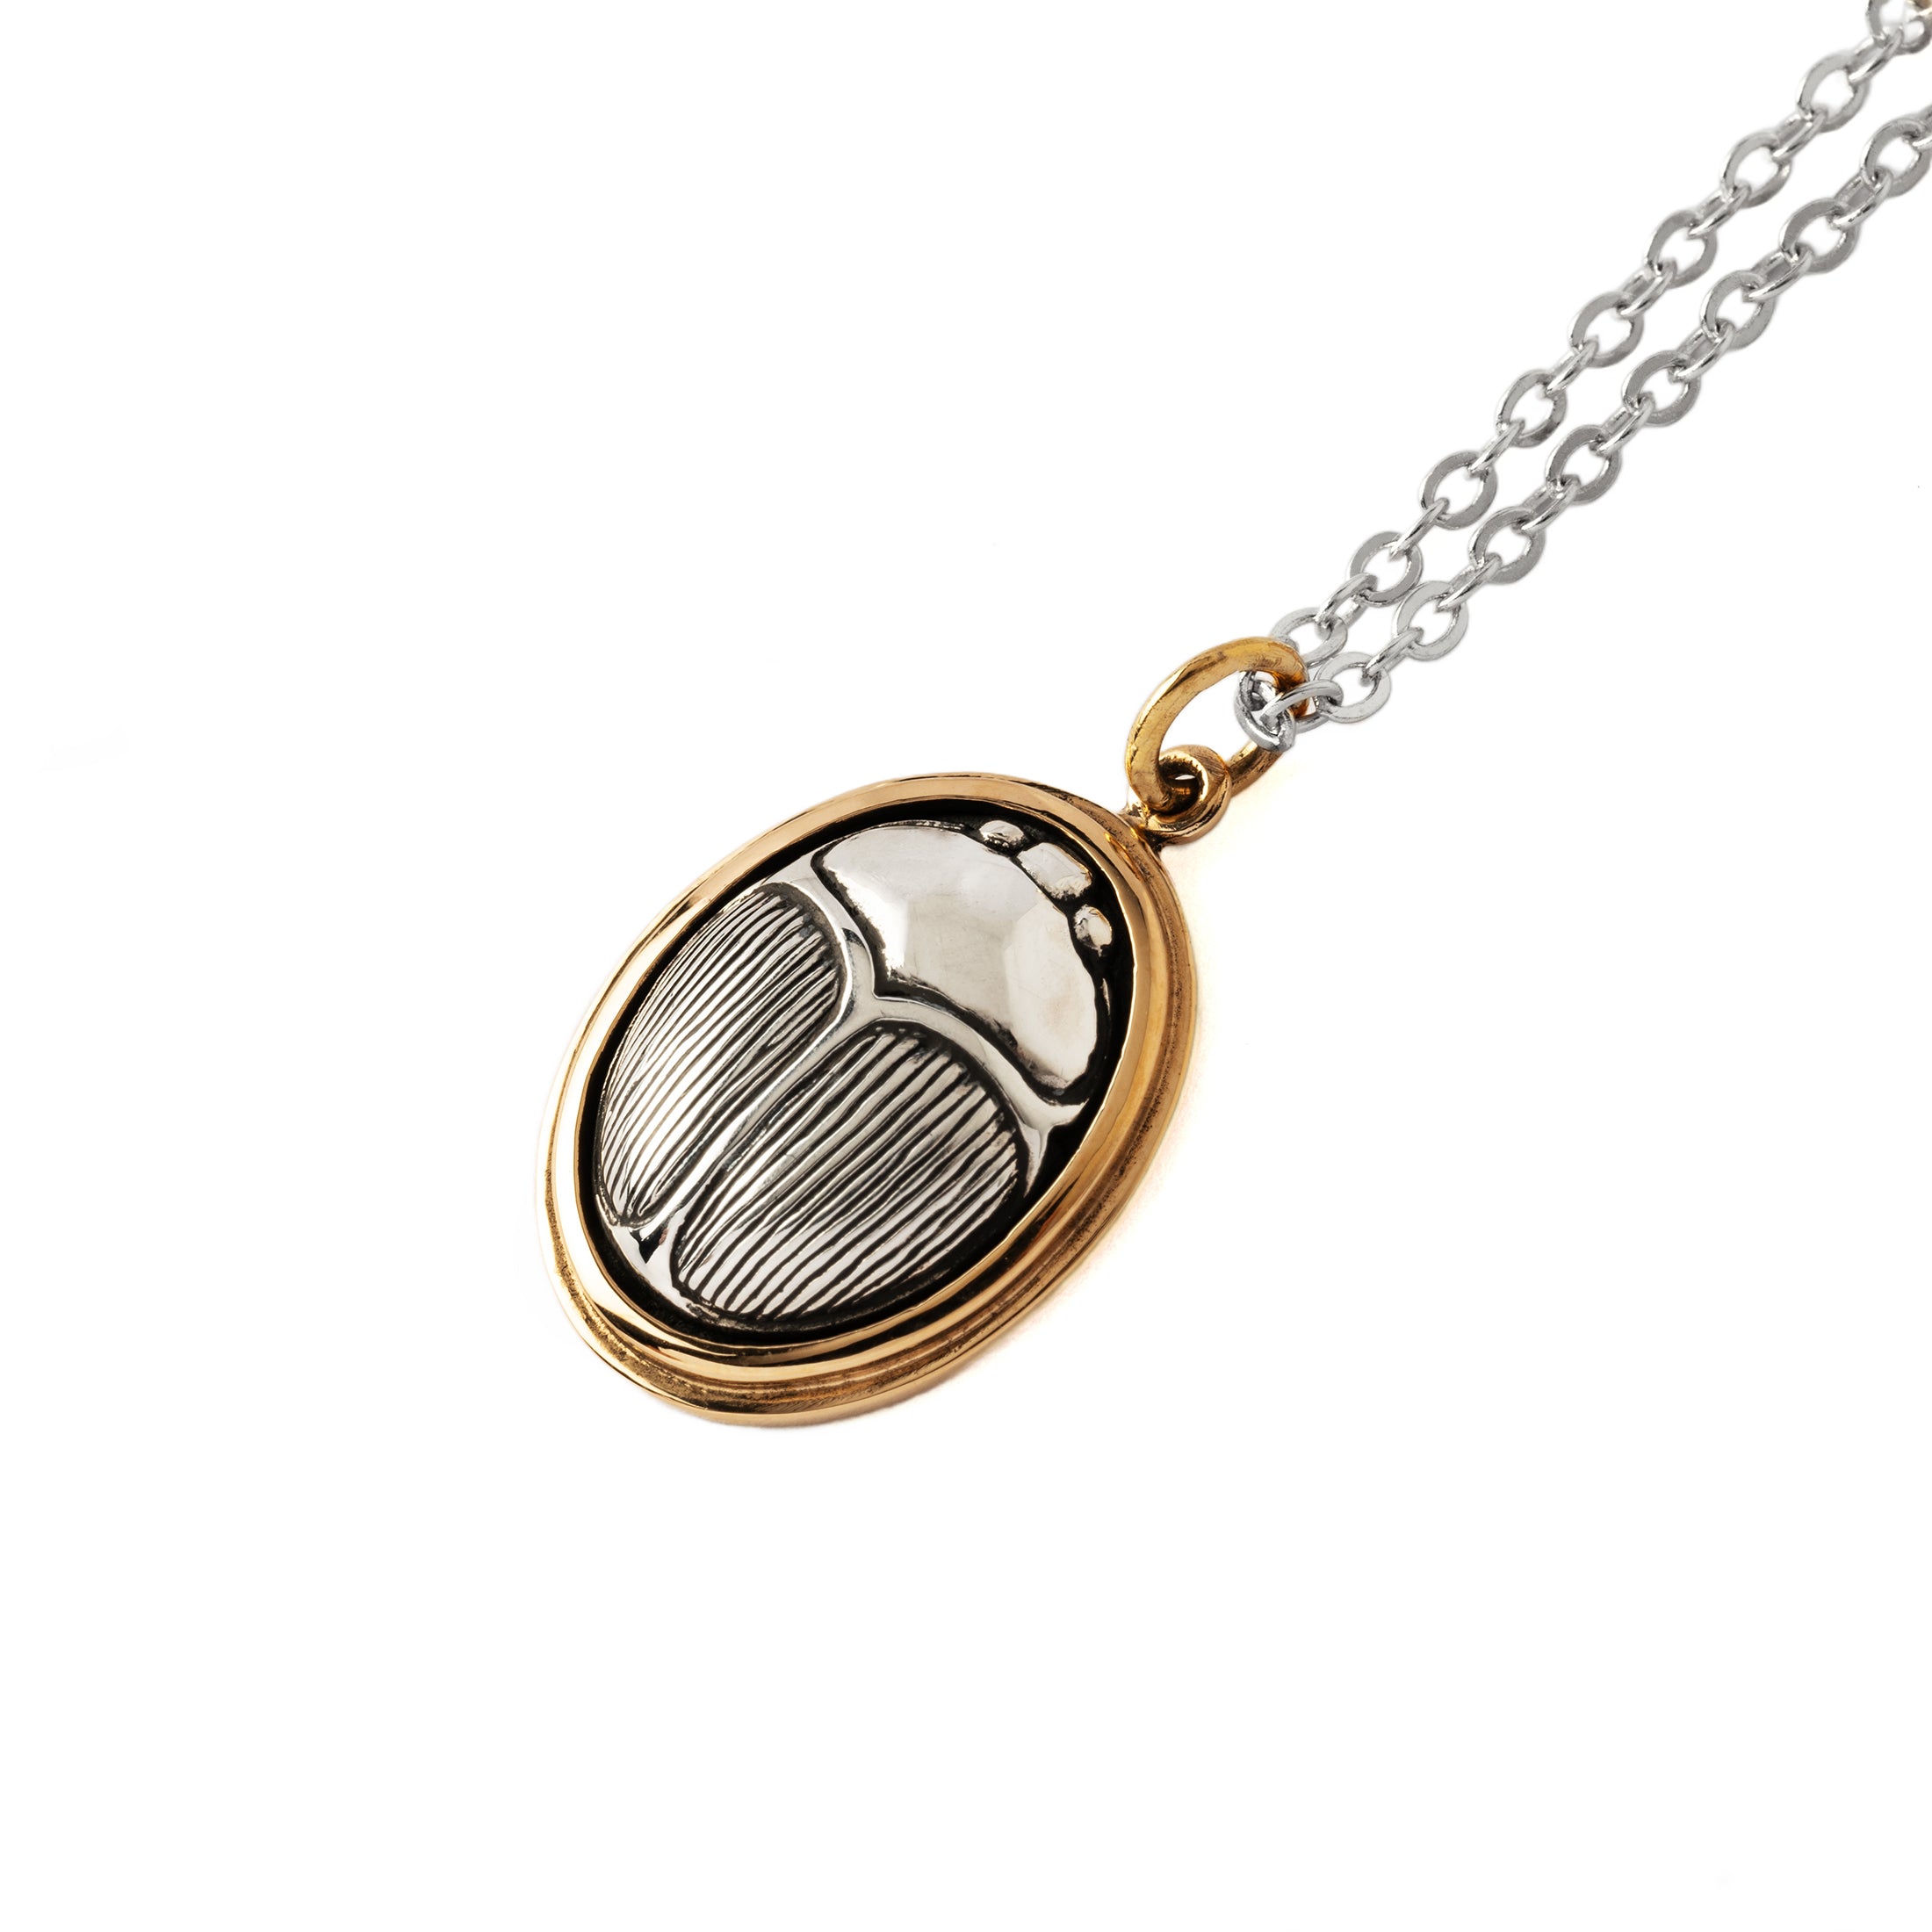 Silver and bronze Scarab Pendant on a chain right side view